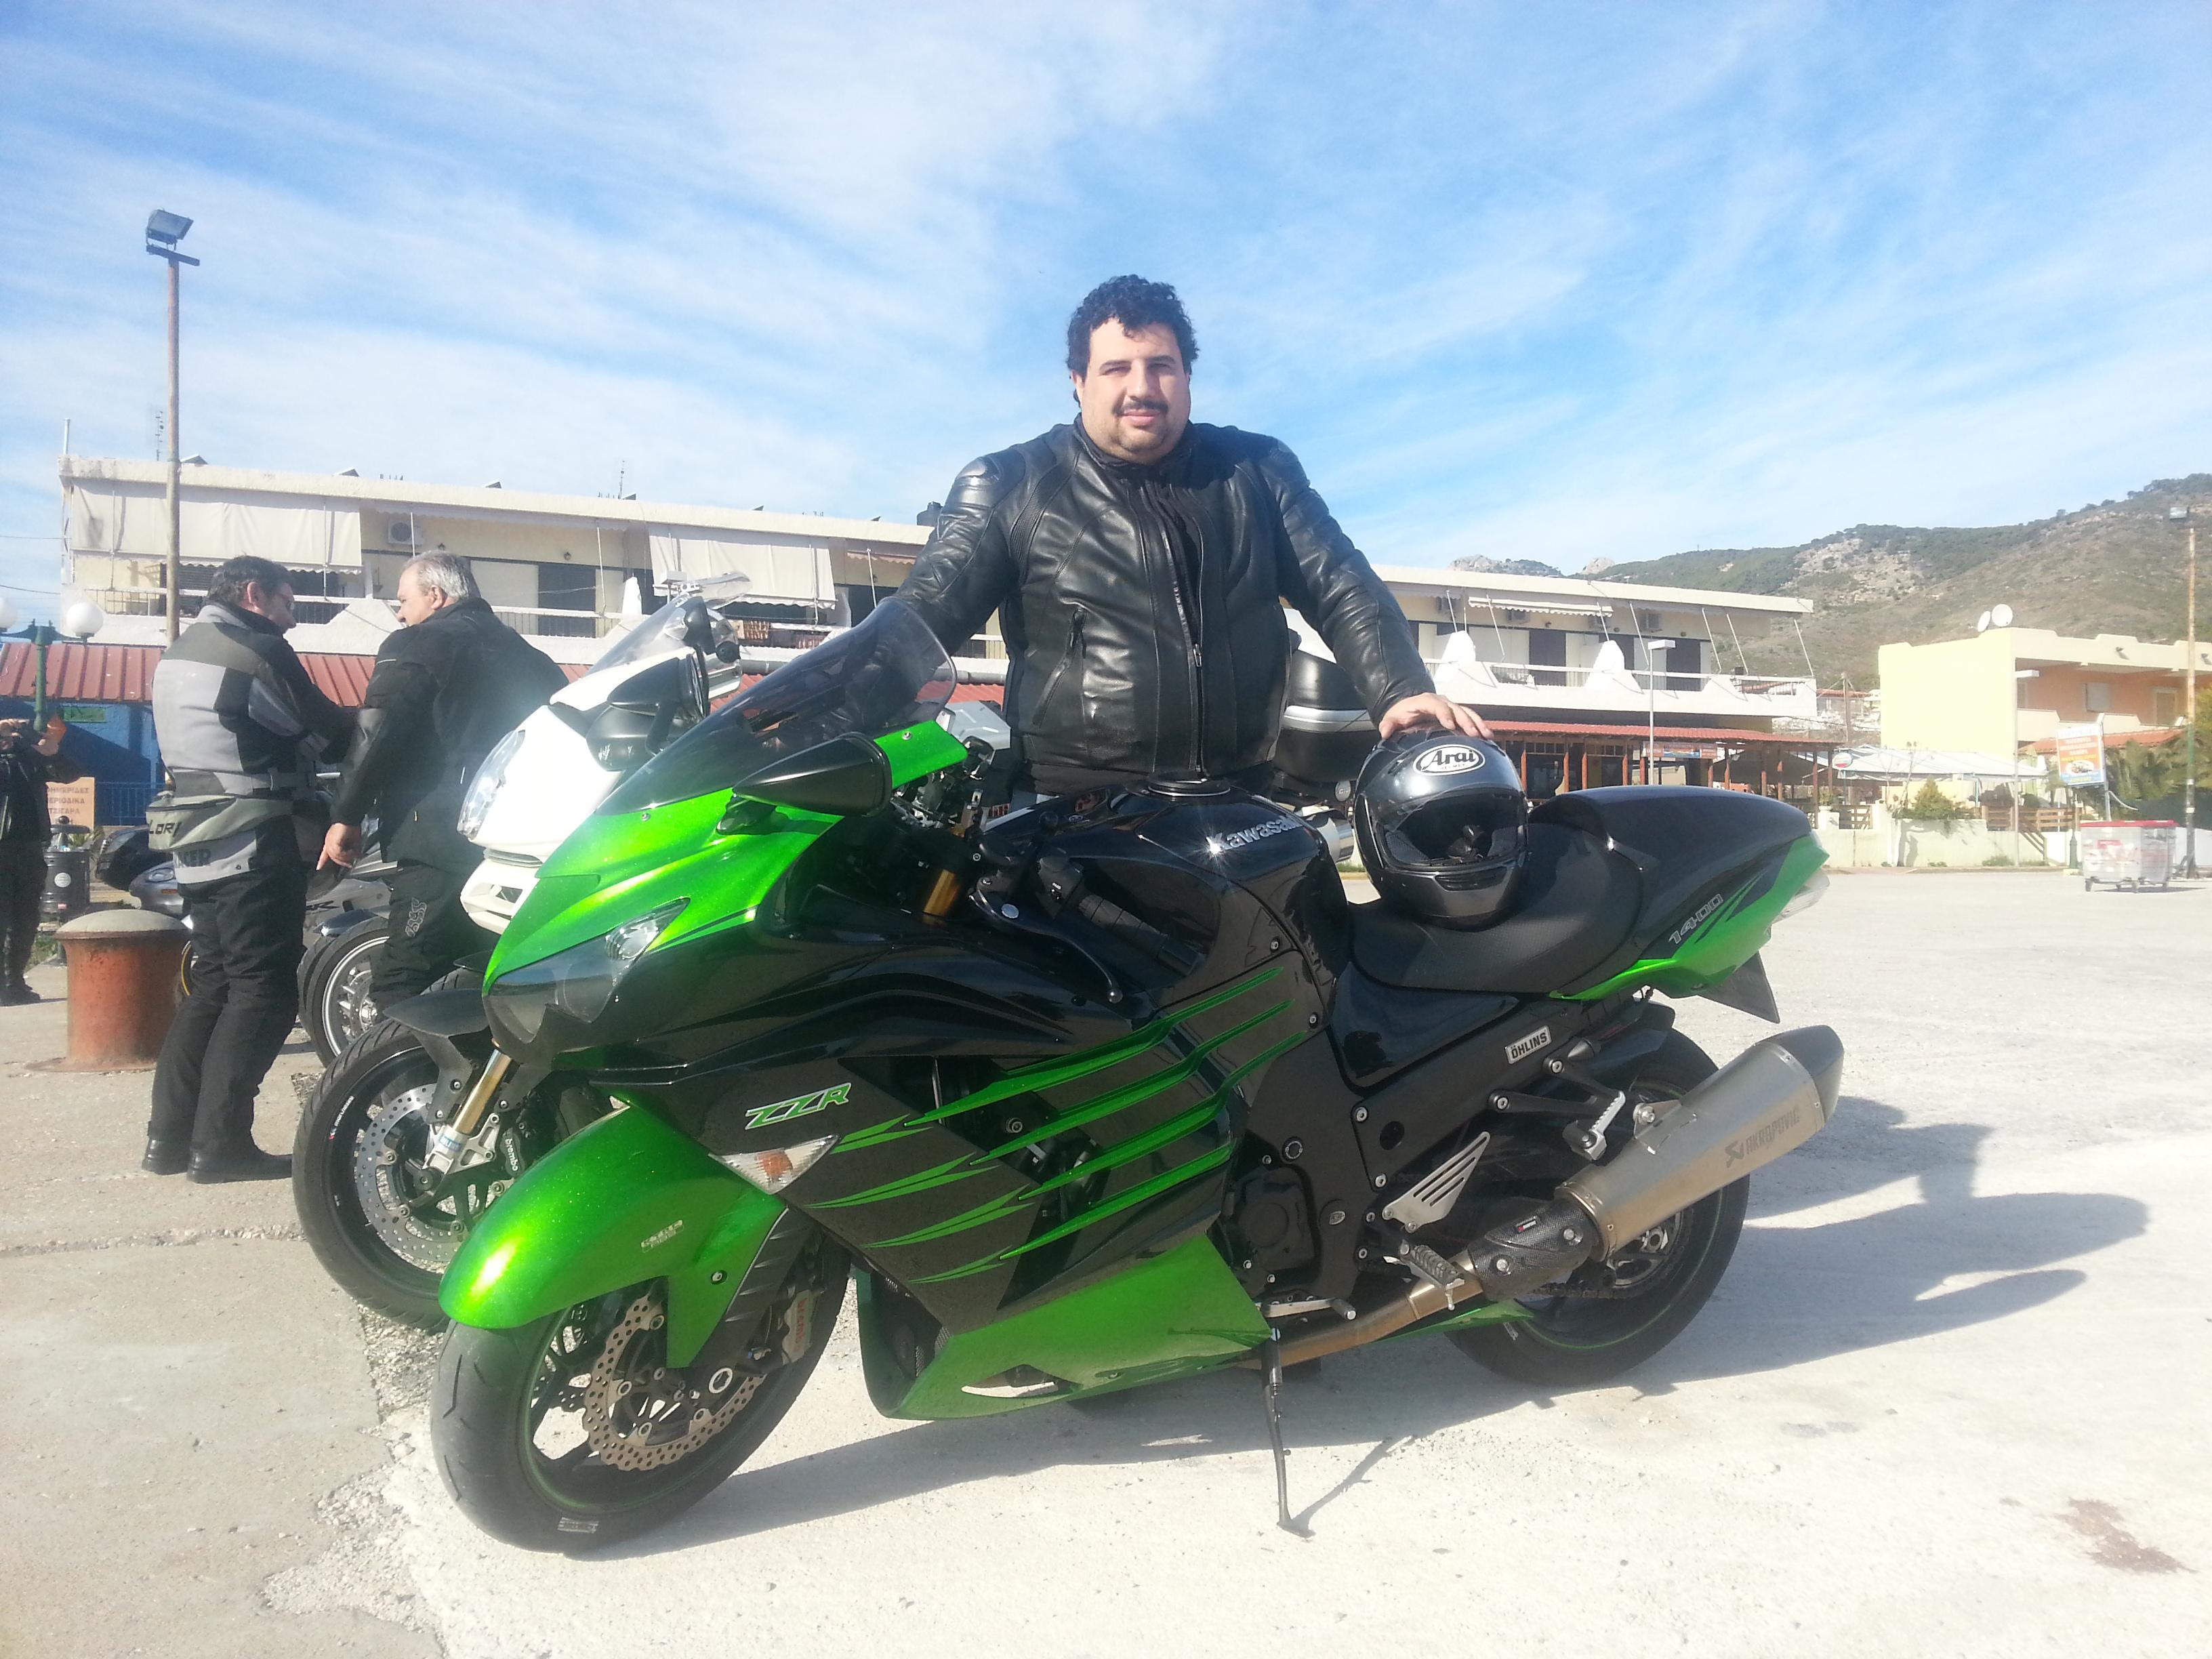 Kawasaki ZZR1400 ECU remap – with the ECU sent in the post from Crete…